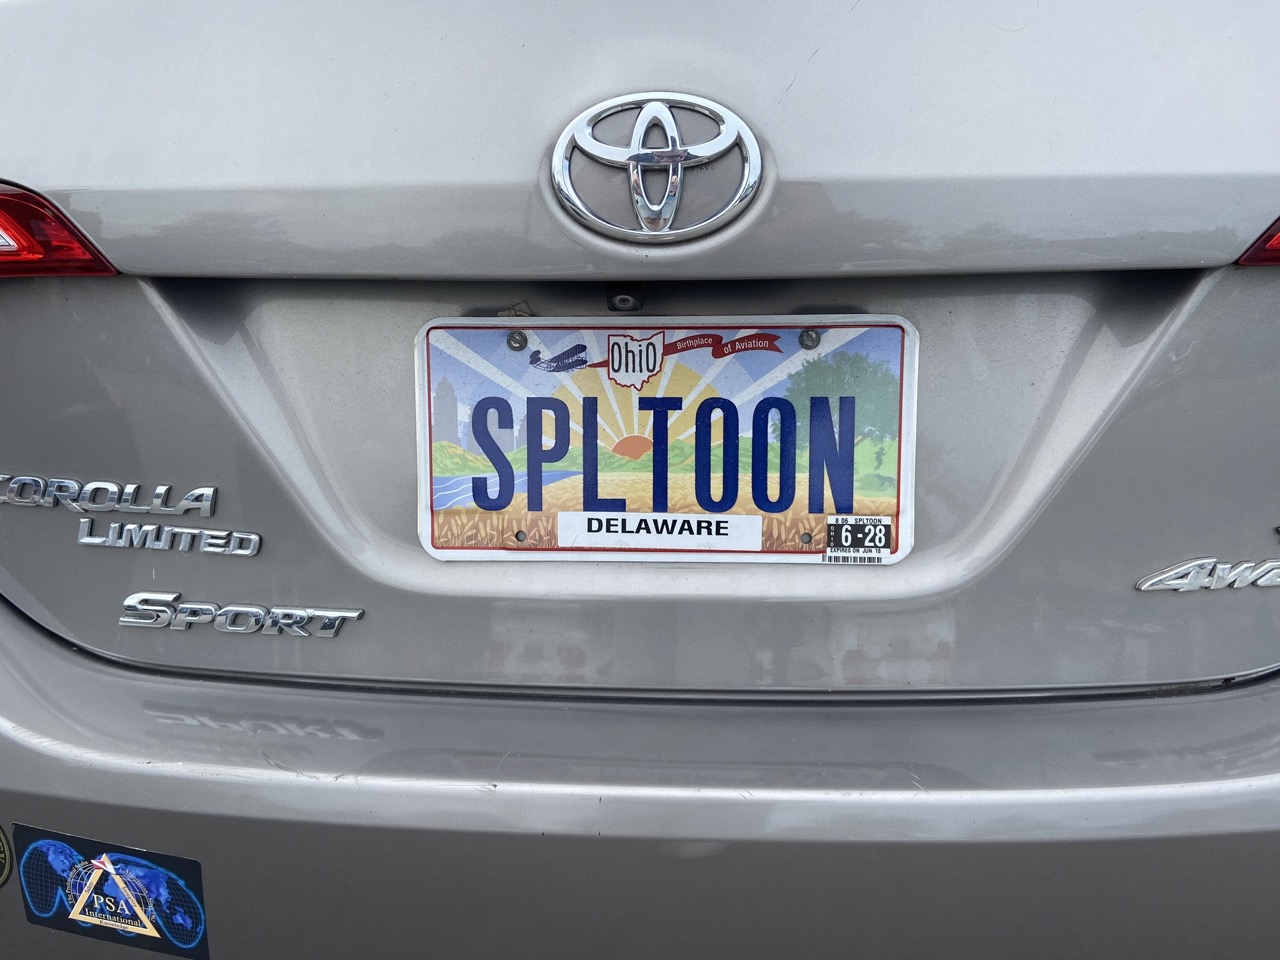 We spotted this license plate literally right after we arrived.